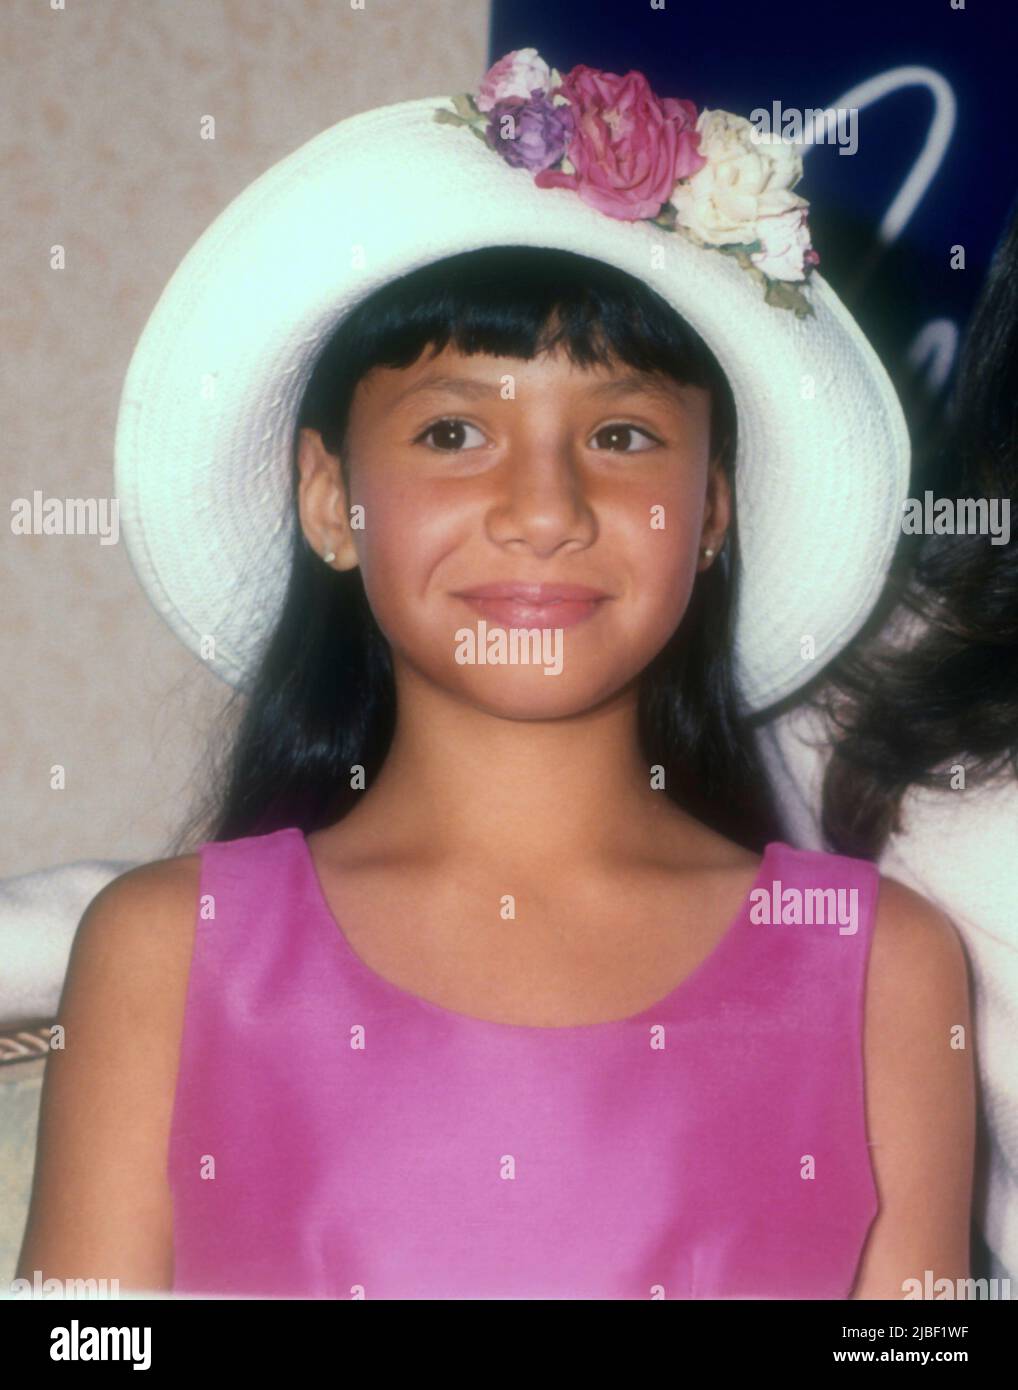 Beverly Hills, California, USA 18th June 1996 Actress Becky Lee Meza  attends 'Selena' Press Conference on June 18, 1996 at The Four Seasons  Hotel in Beverly Hills, California, USA. Photo by Barry